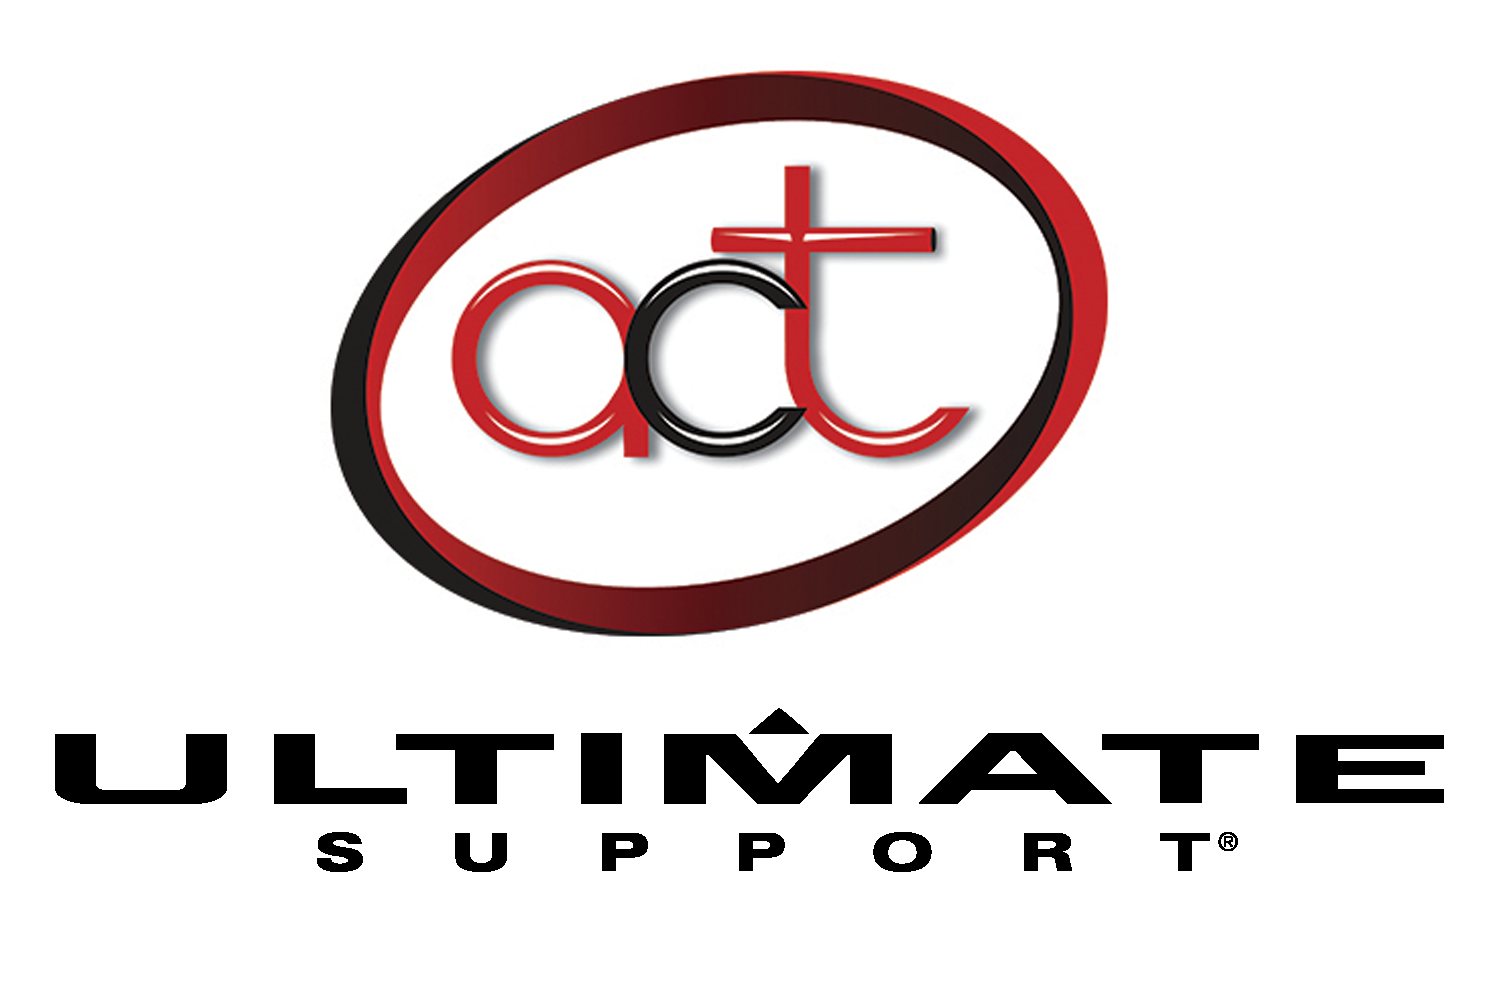 Ultimate Support Systems